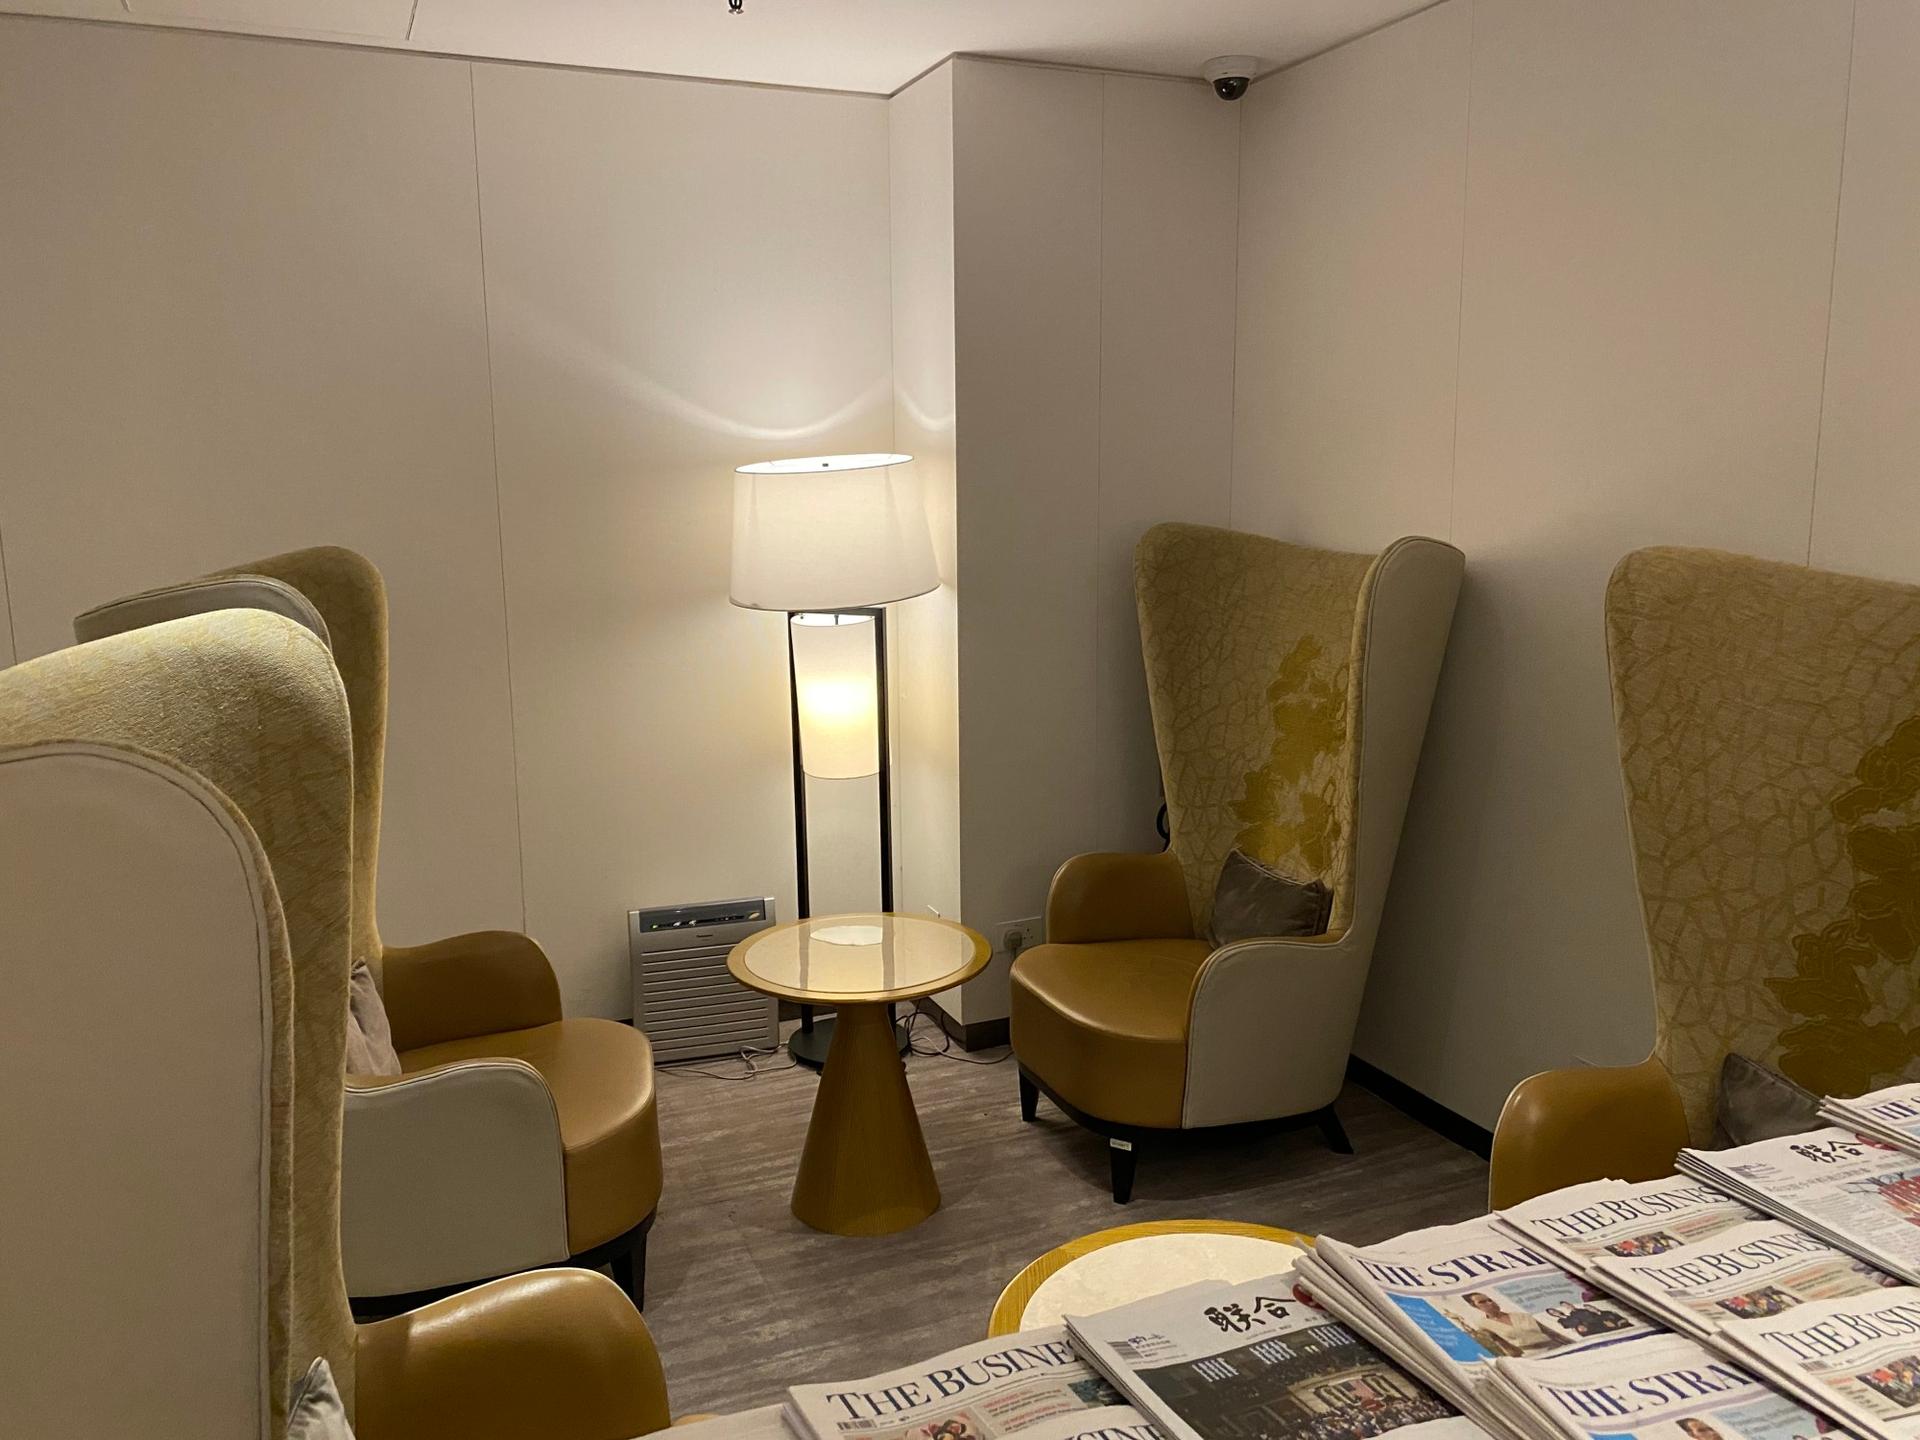 Singapore Airlines SilverKris Business Class Lounge image 68 of 68